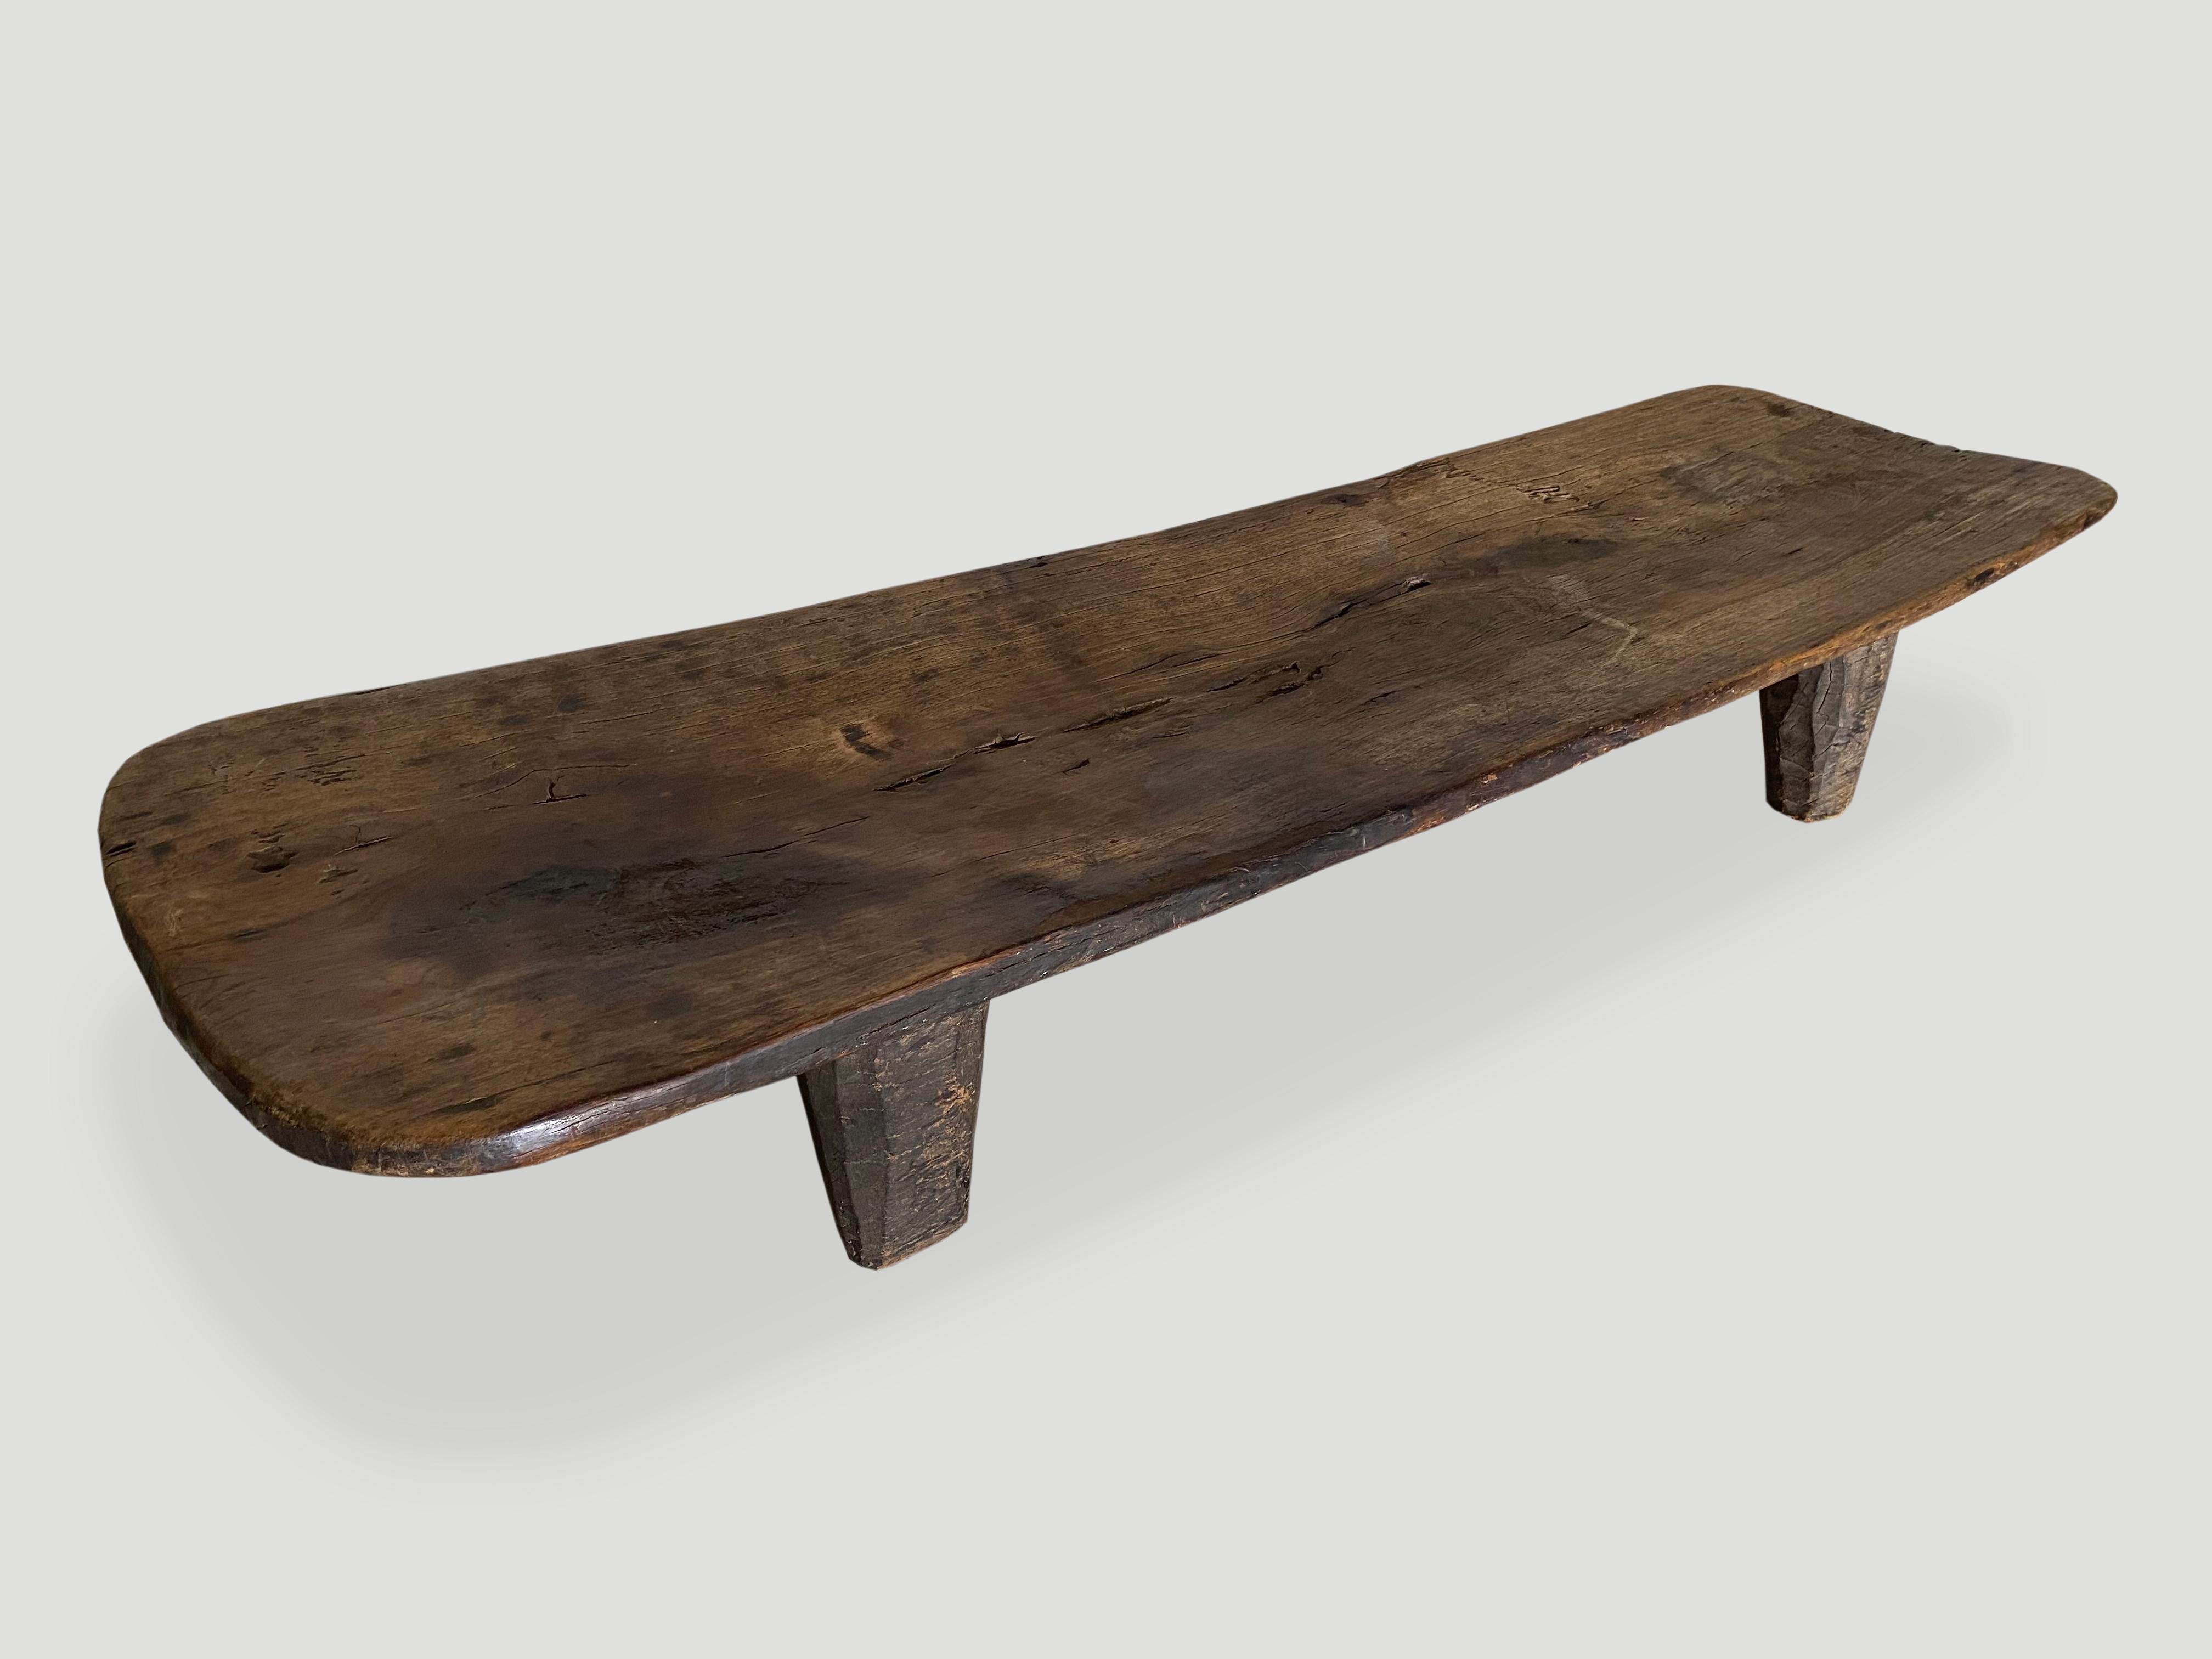 Stunning patina on this antique Senufu bed. The length and width are rare. Hand carved by the Senufo tribe from a single block of wood, native to the west coast of Africa. The wood is tough, dense and very durable. This one is unusually long and